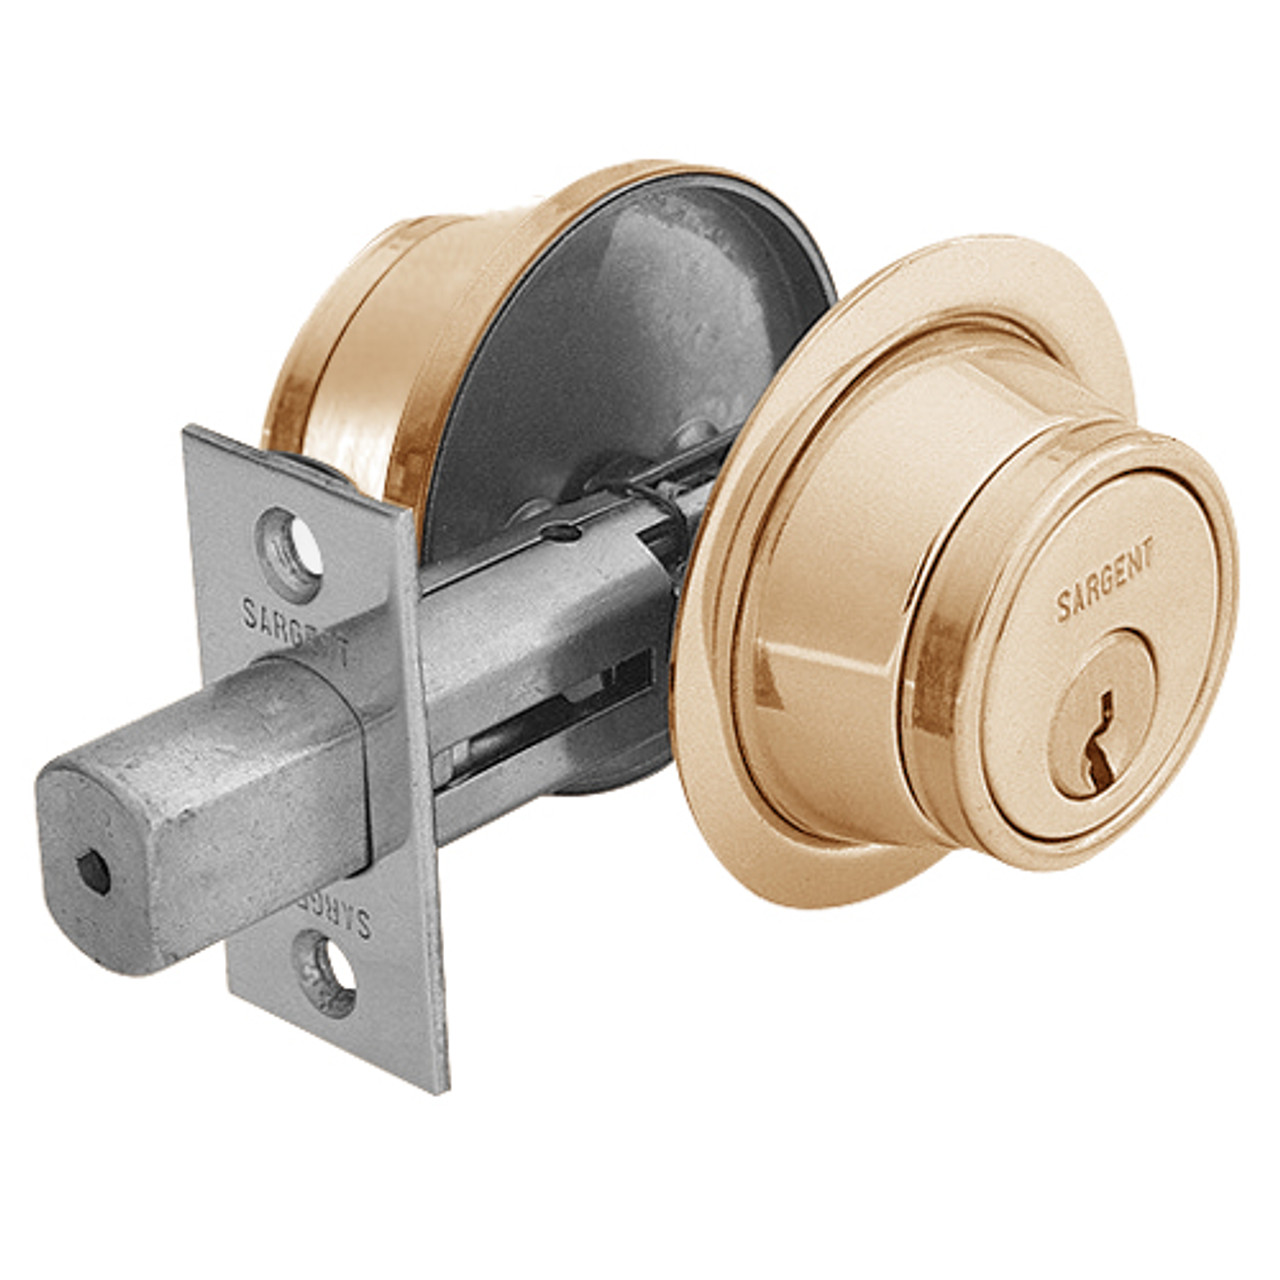 13-474-10 Sargent 470 Series Double Cylinder Auxiliary Deadbolt Lock in Satin Bronze